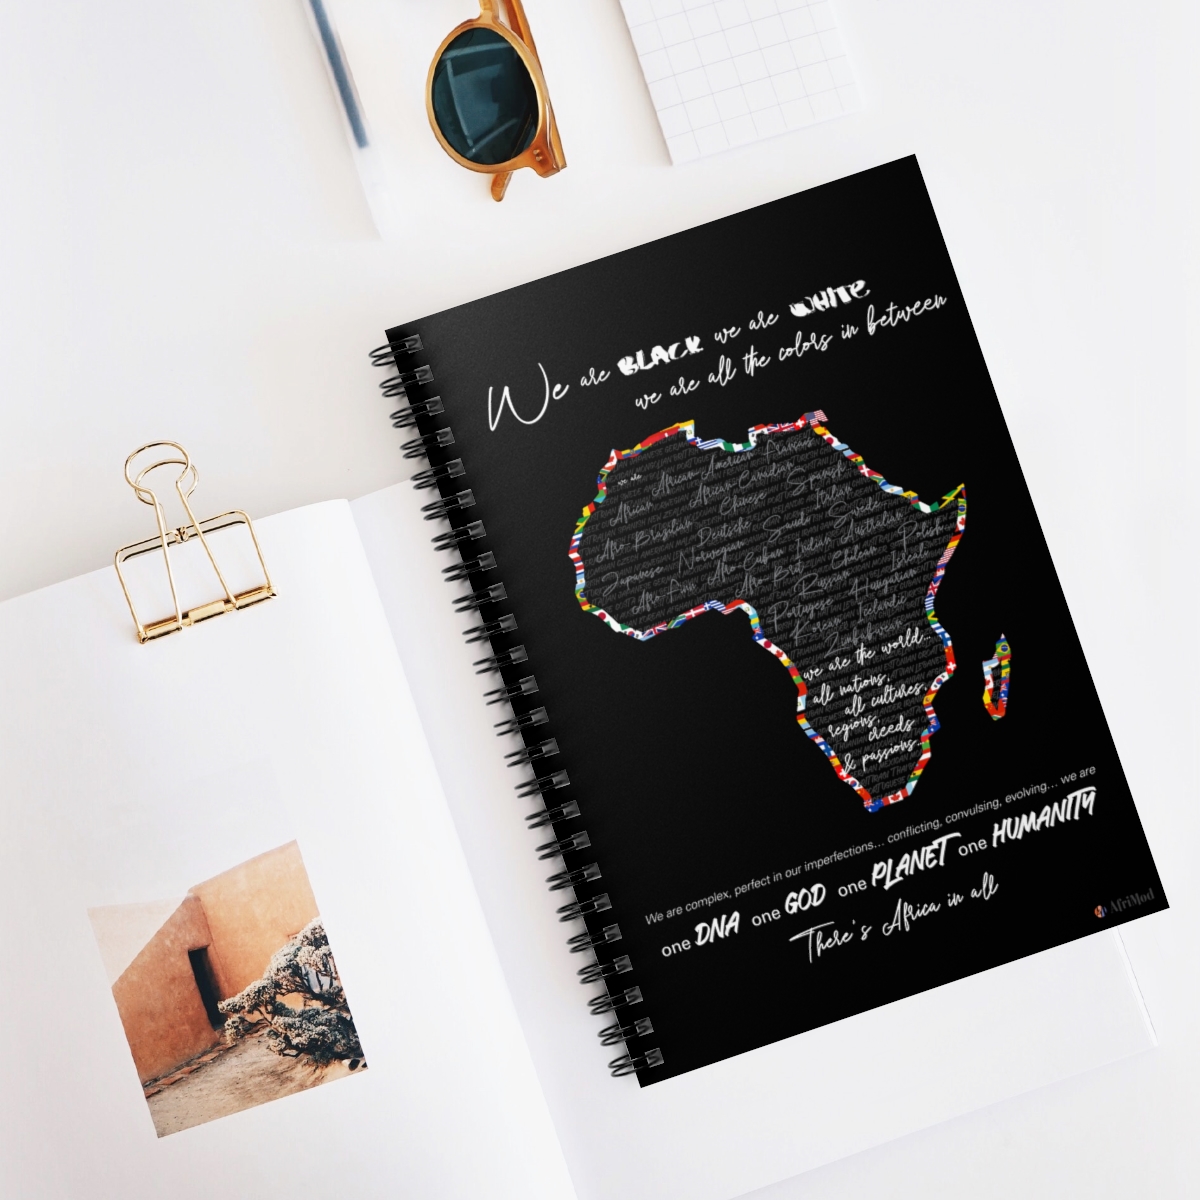 Africa in All – Inspirational Notebook (spiral bound)